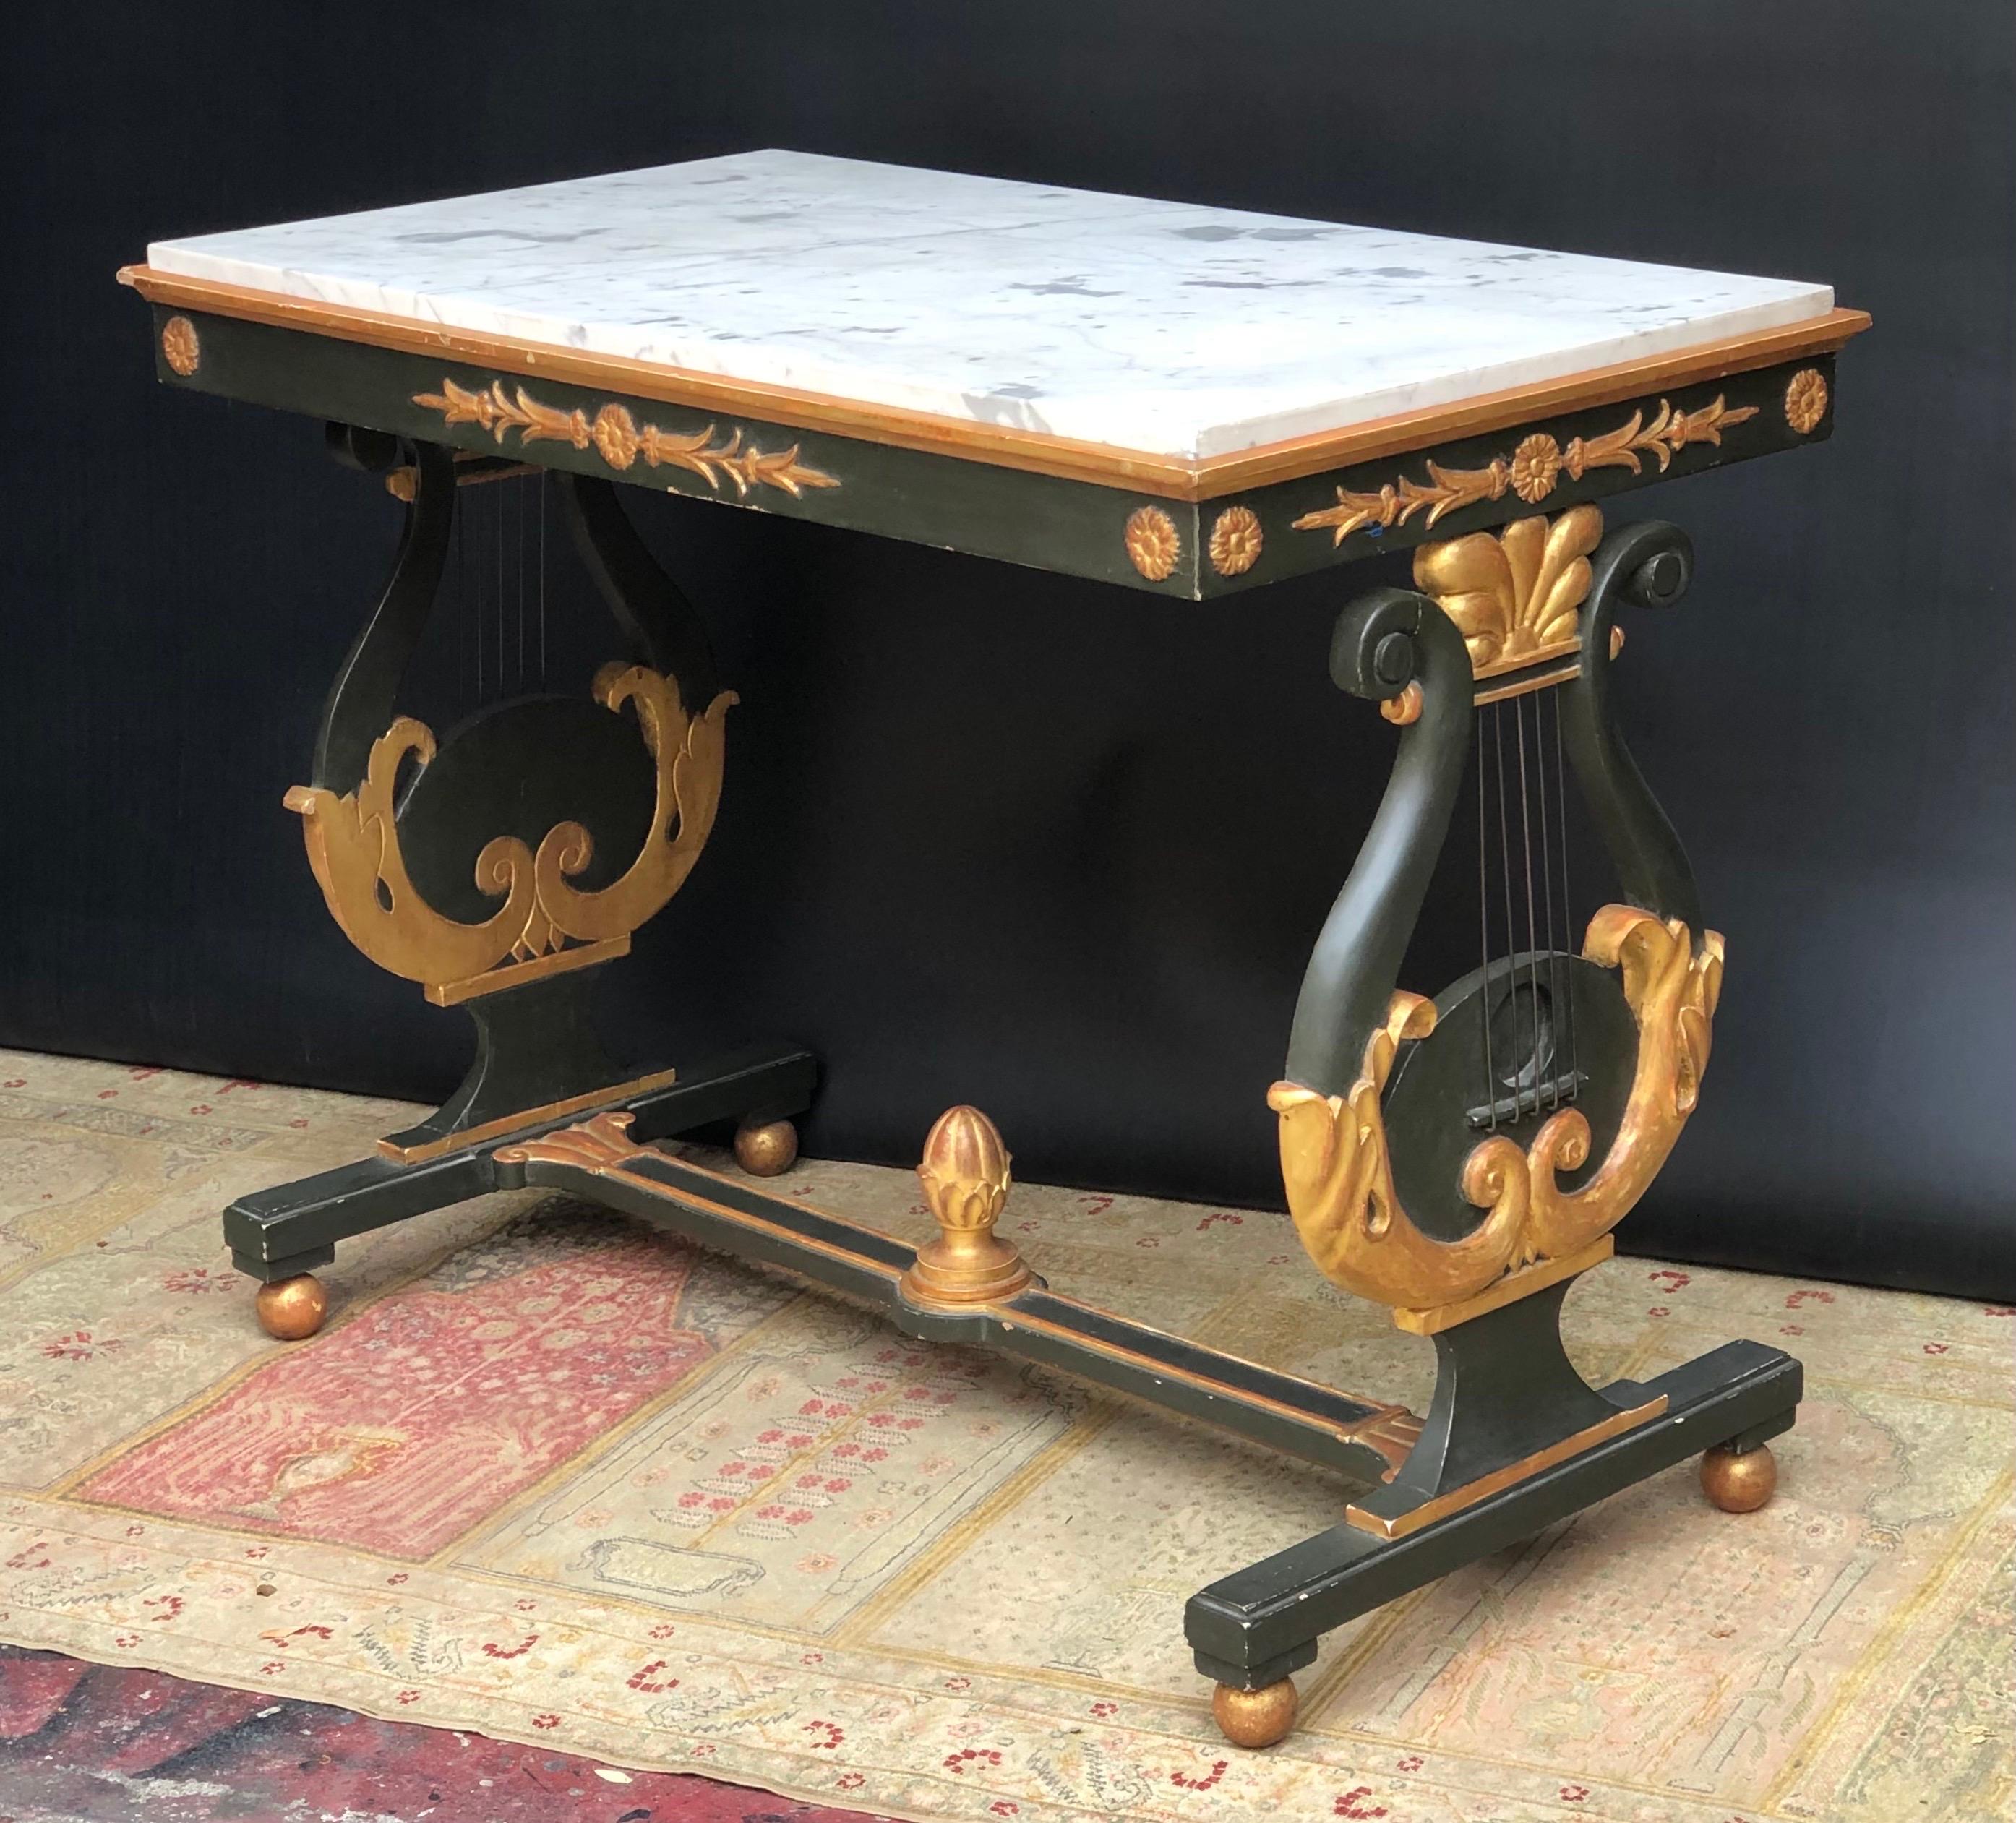 A Sophisticated Neo-Classic Parcel-gilt and Verde Painted Italian Lyre base marble top table / console made in the 19th Century. This Classical Italian Lyre Base Marble Top Table / Console has an exquisite gray veined Carrara Marble Top inset into a